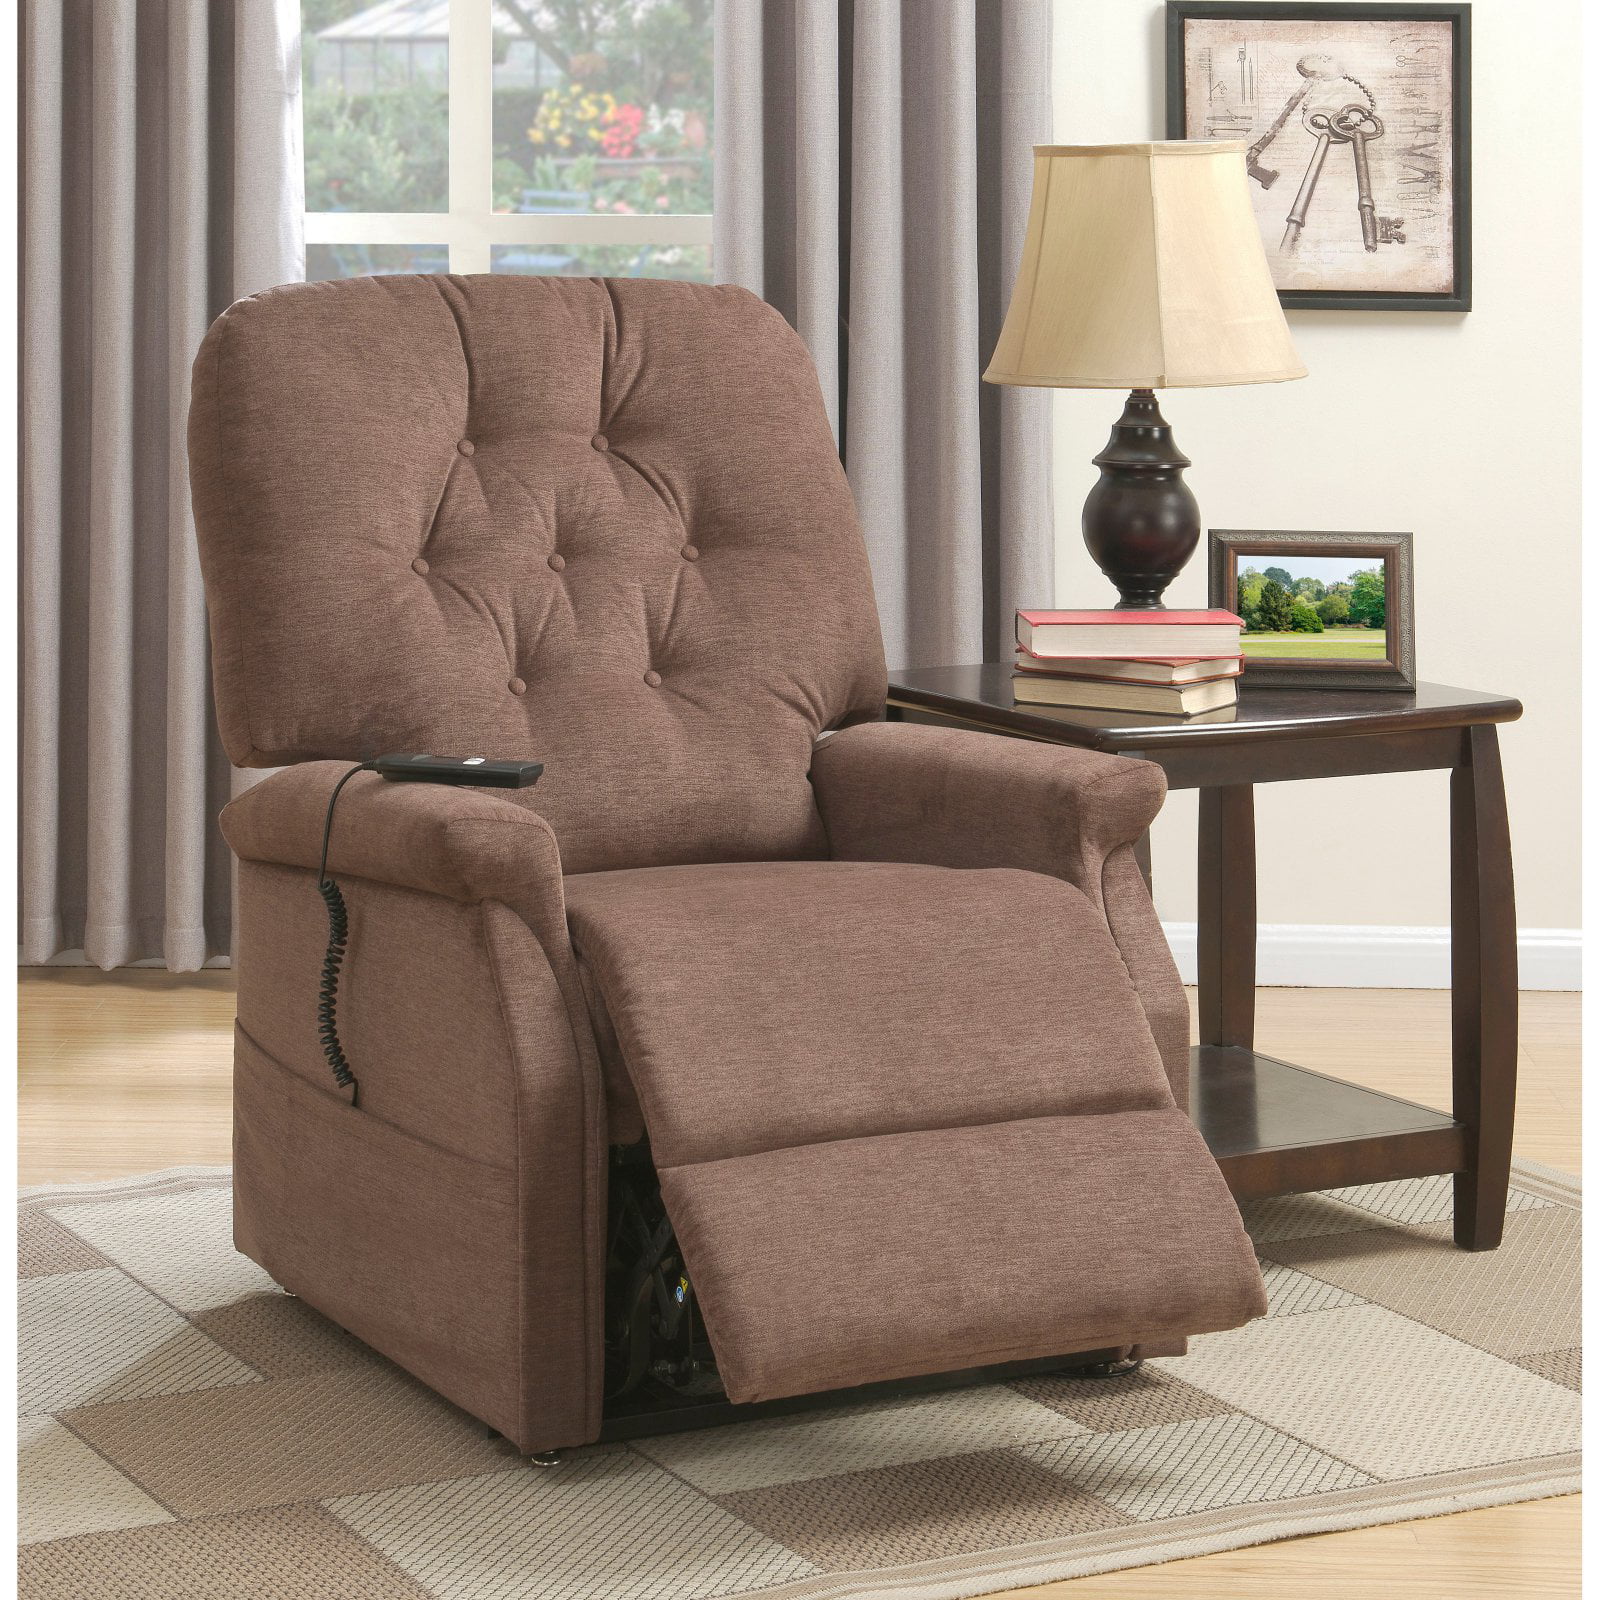 Modern Lift Chairs For Sale At Walmart for Simple Design